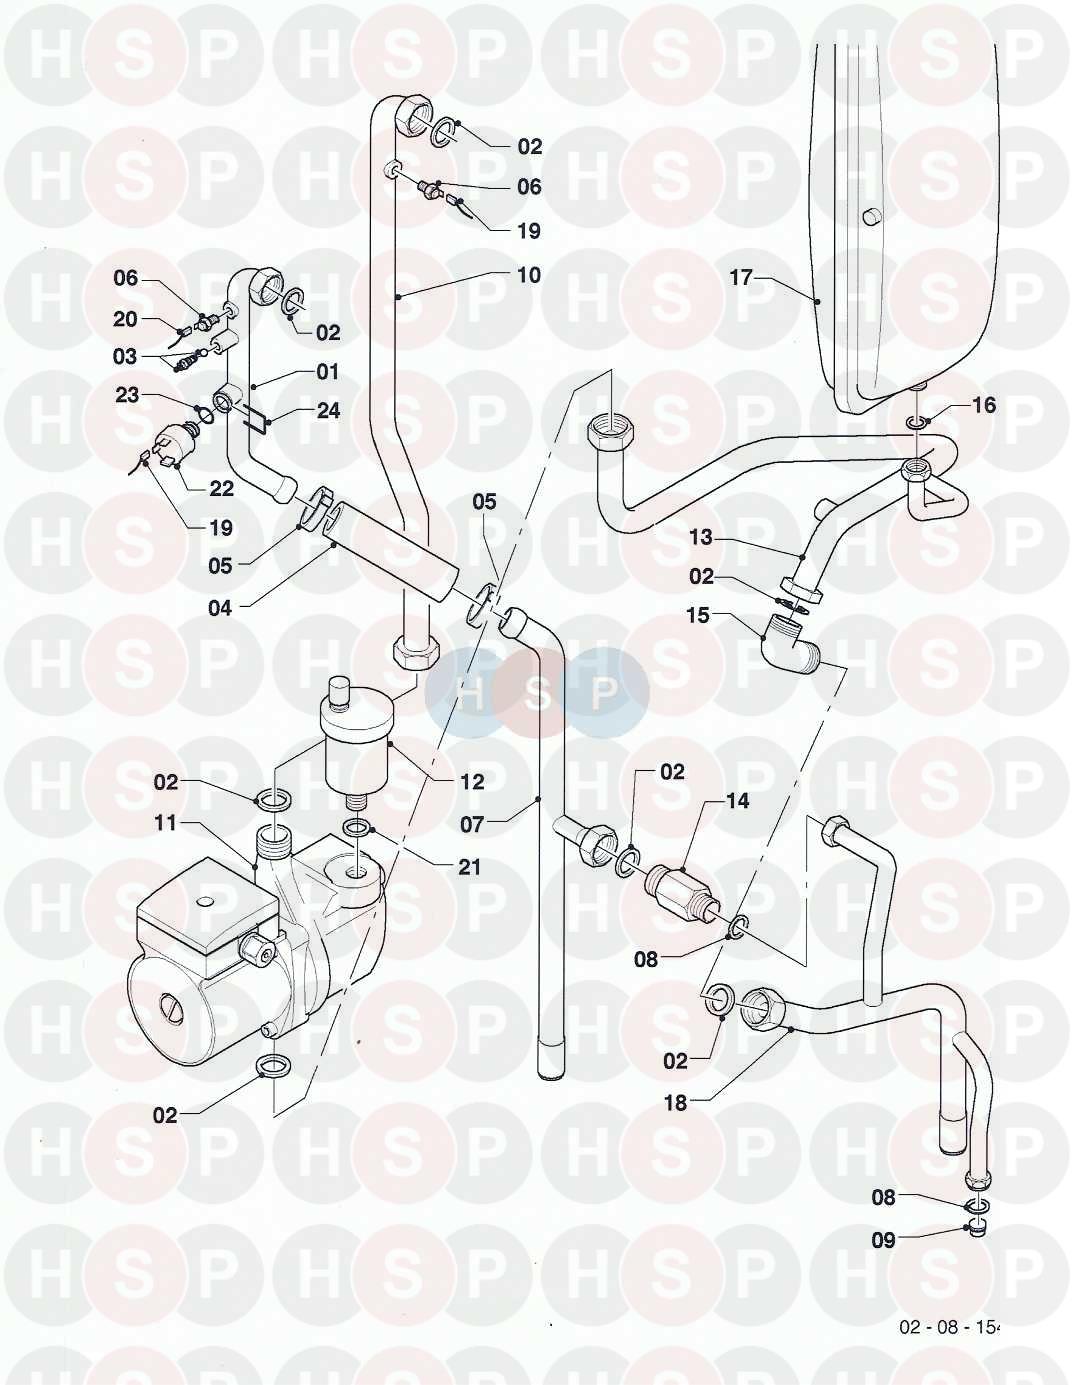 08 Connection Parts diagram for Vaillant Ecomax 635 VU (Condensing System) 2006-2008